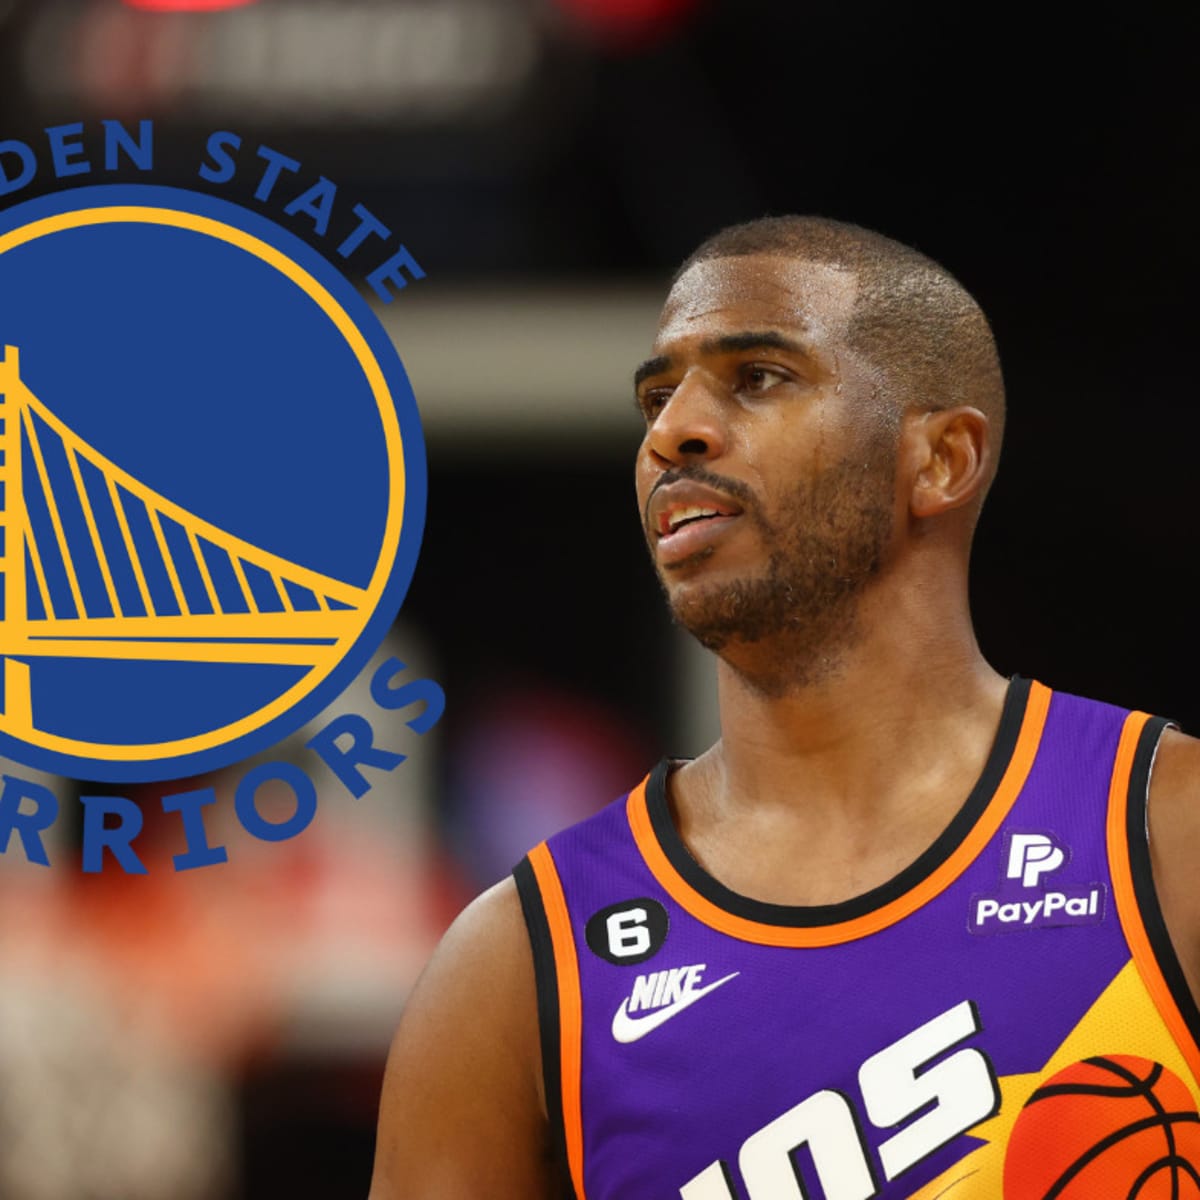 Warriors' Chris Paul comes off bench for 1st time in his NBA